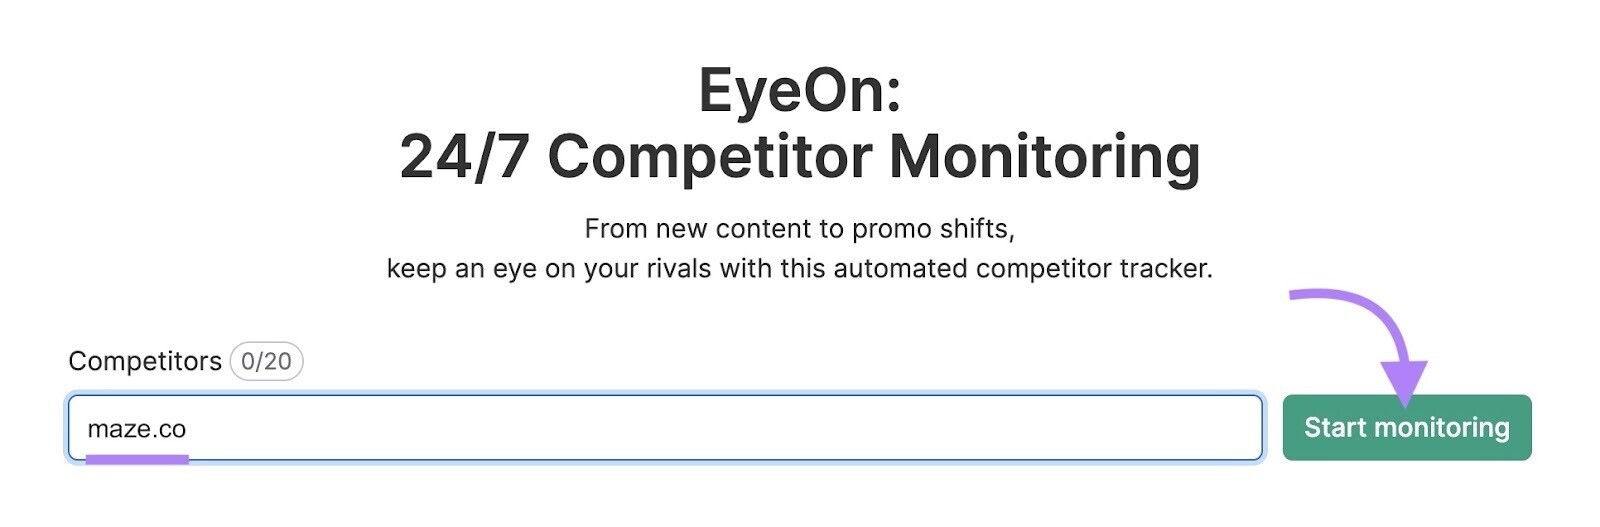 search for your competitors in EyeOn tool to get insights into their online marketing moves